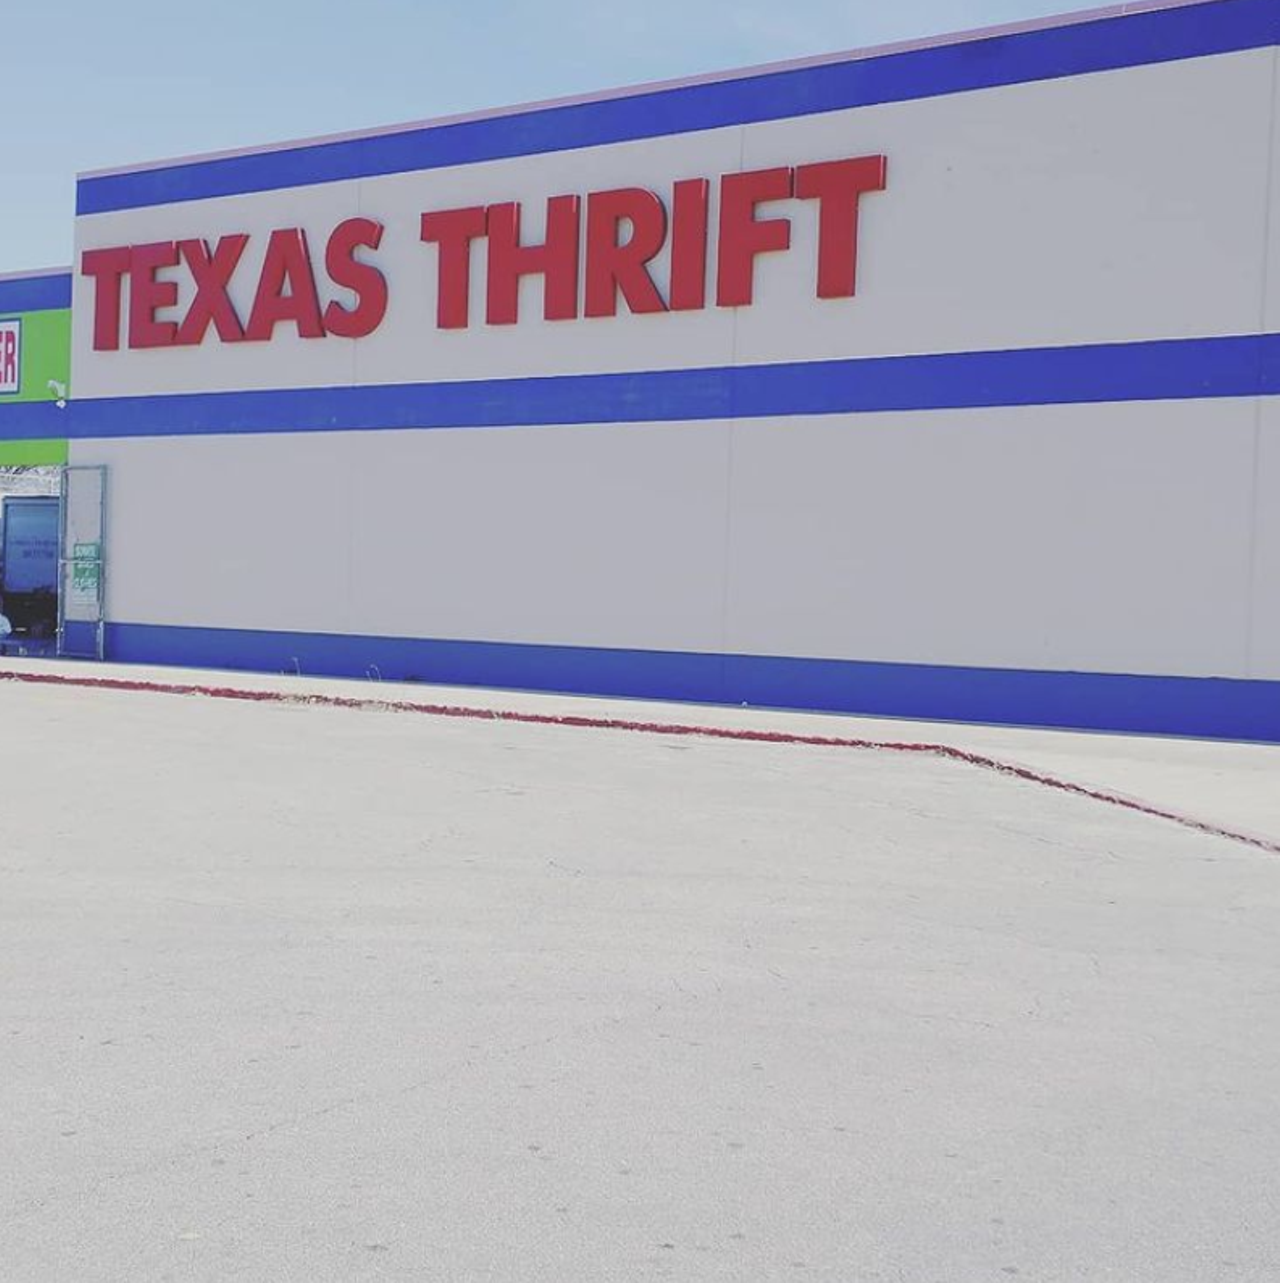 Texas Thrift Store
Multiple locations, buythrift.com
With four locations across SA, Texas Thrifts are as large as their namesake implies, offering thousands of items every day. No matter what section you’re shopping in, the selection is bountiful and offers something for everyone.
Photo via Instagram / texans_sosa